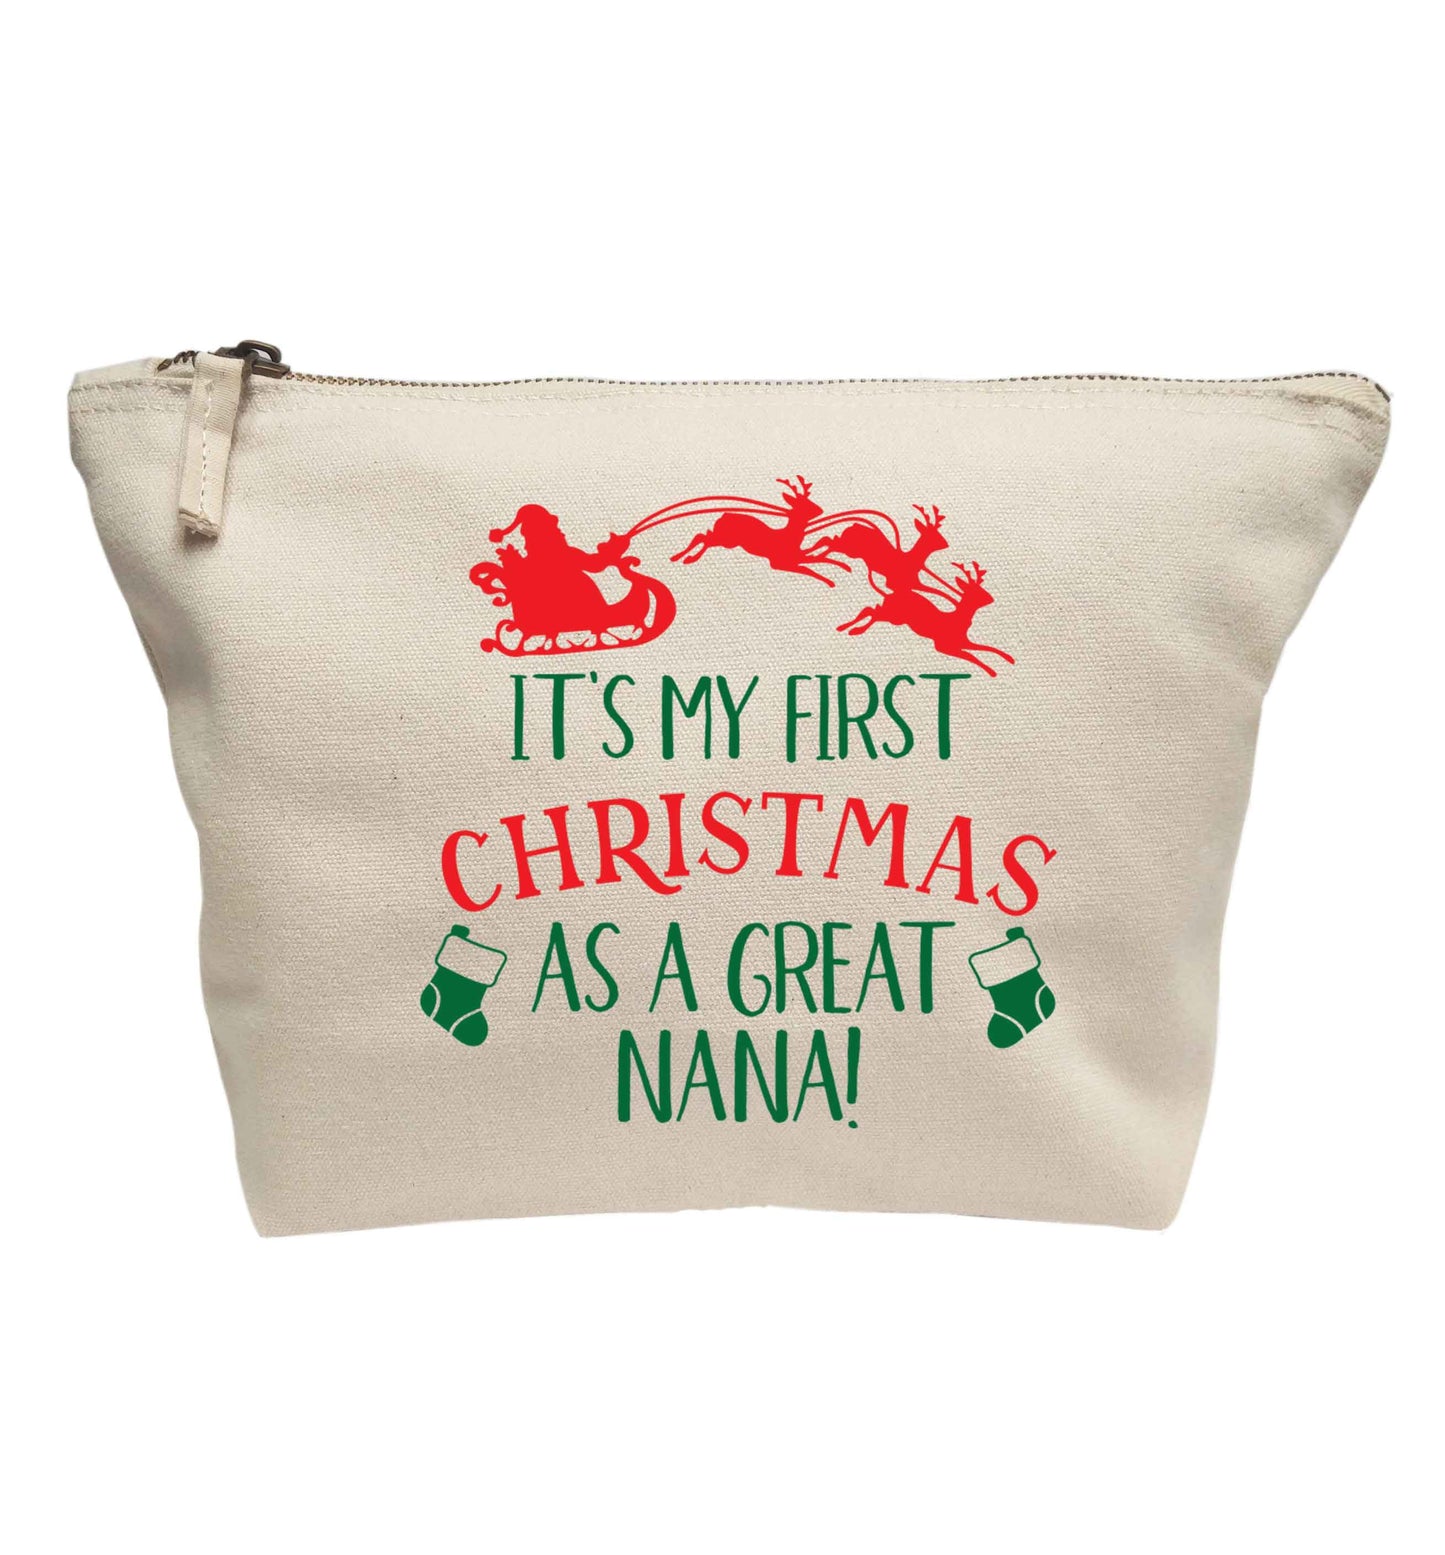 It's my first Christmas as a great nana! | makeup / wash bag